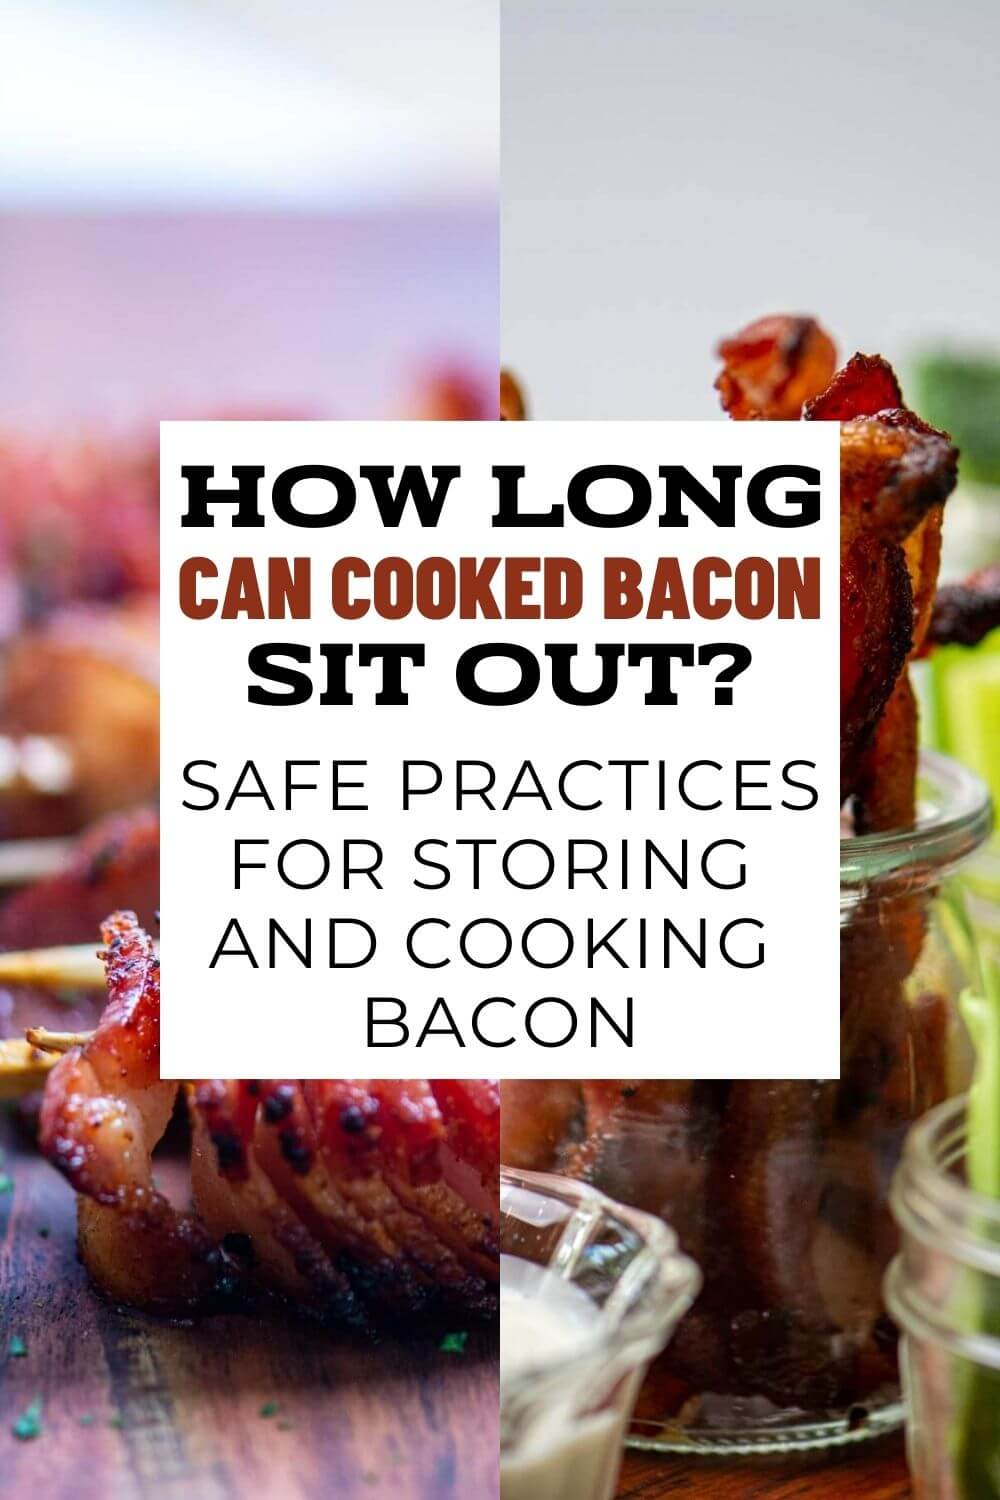 Can Cooked Bacon Sit Out Overnight?